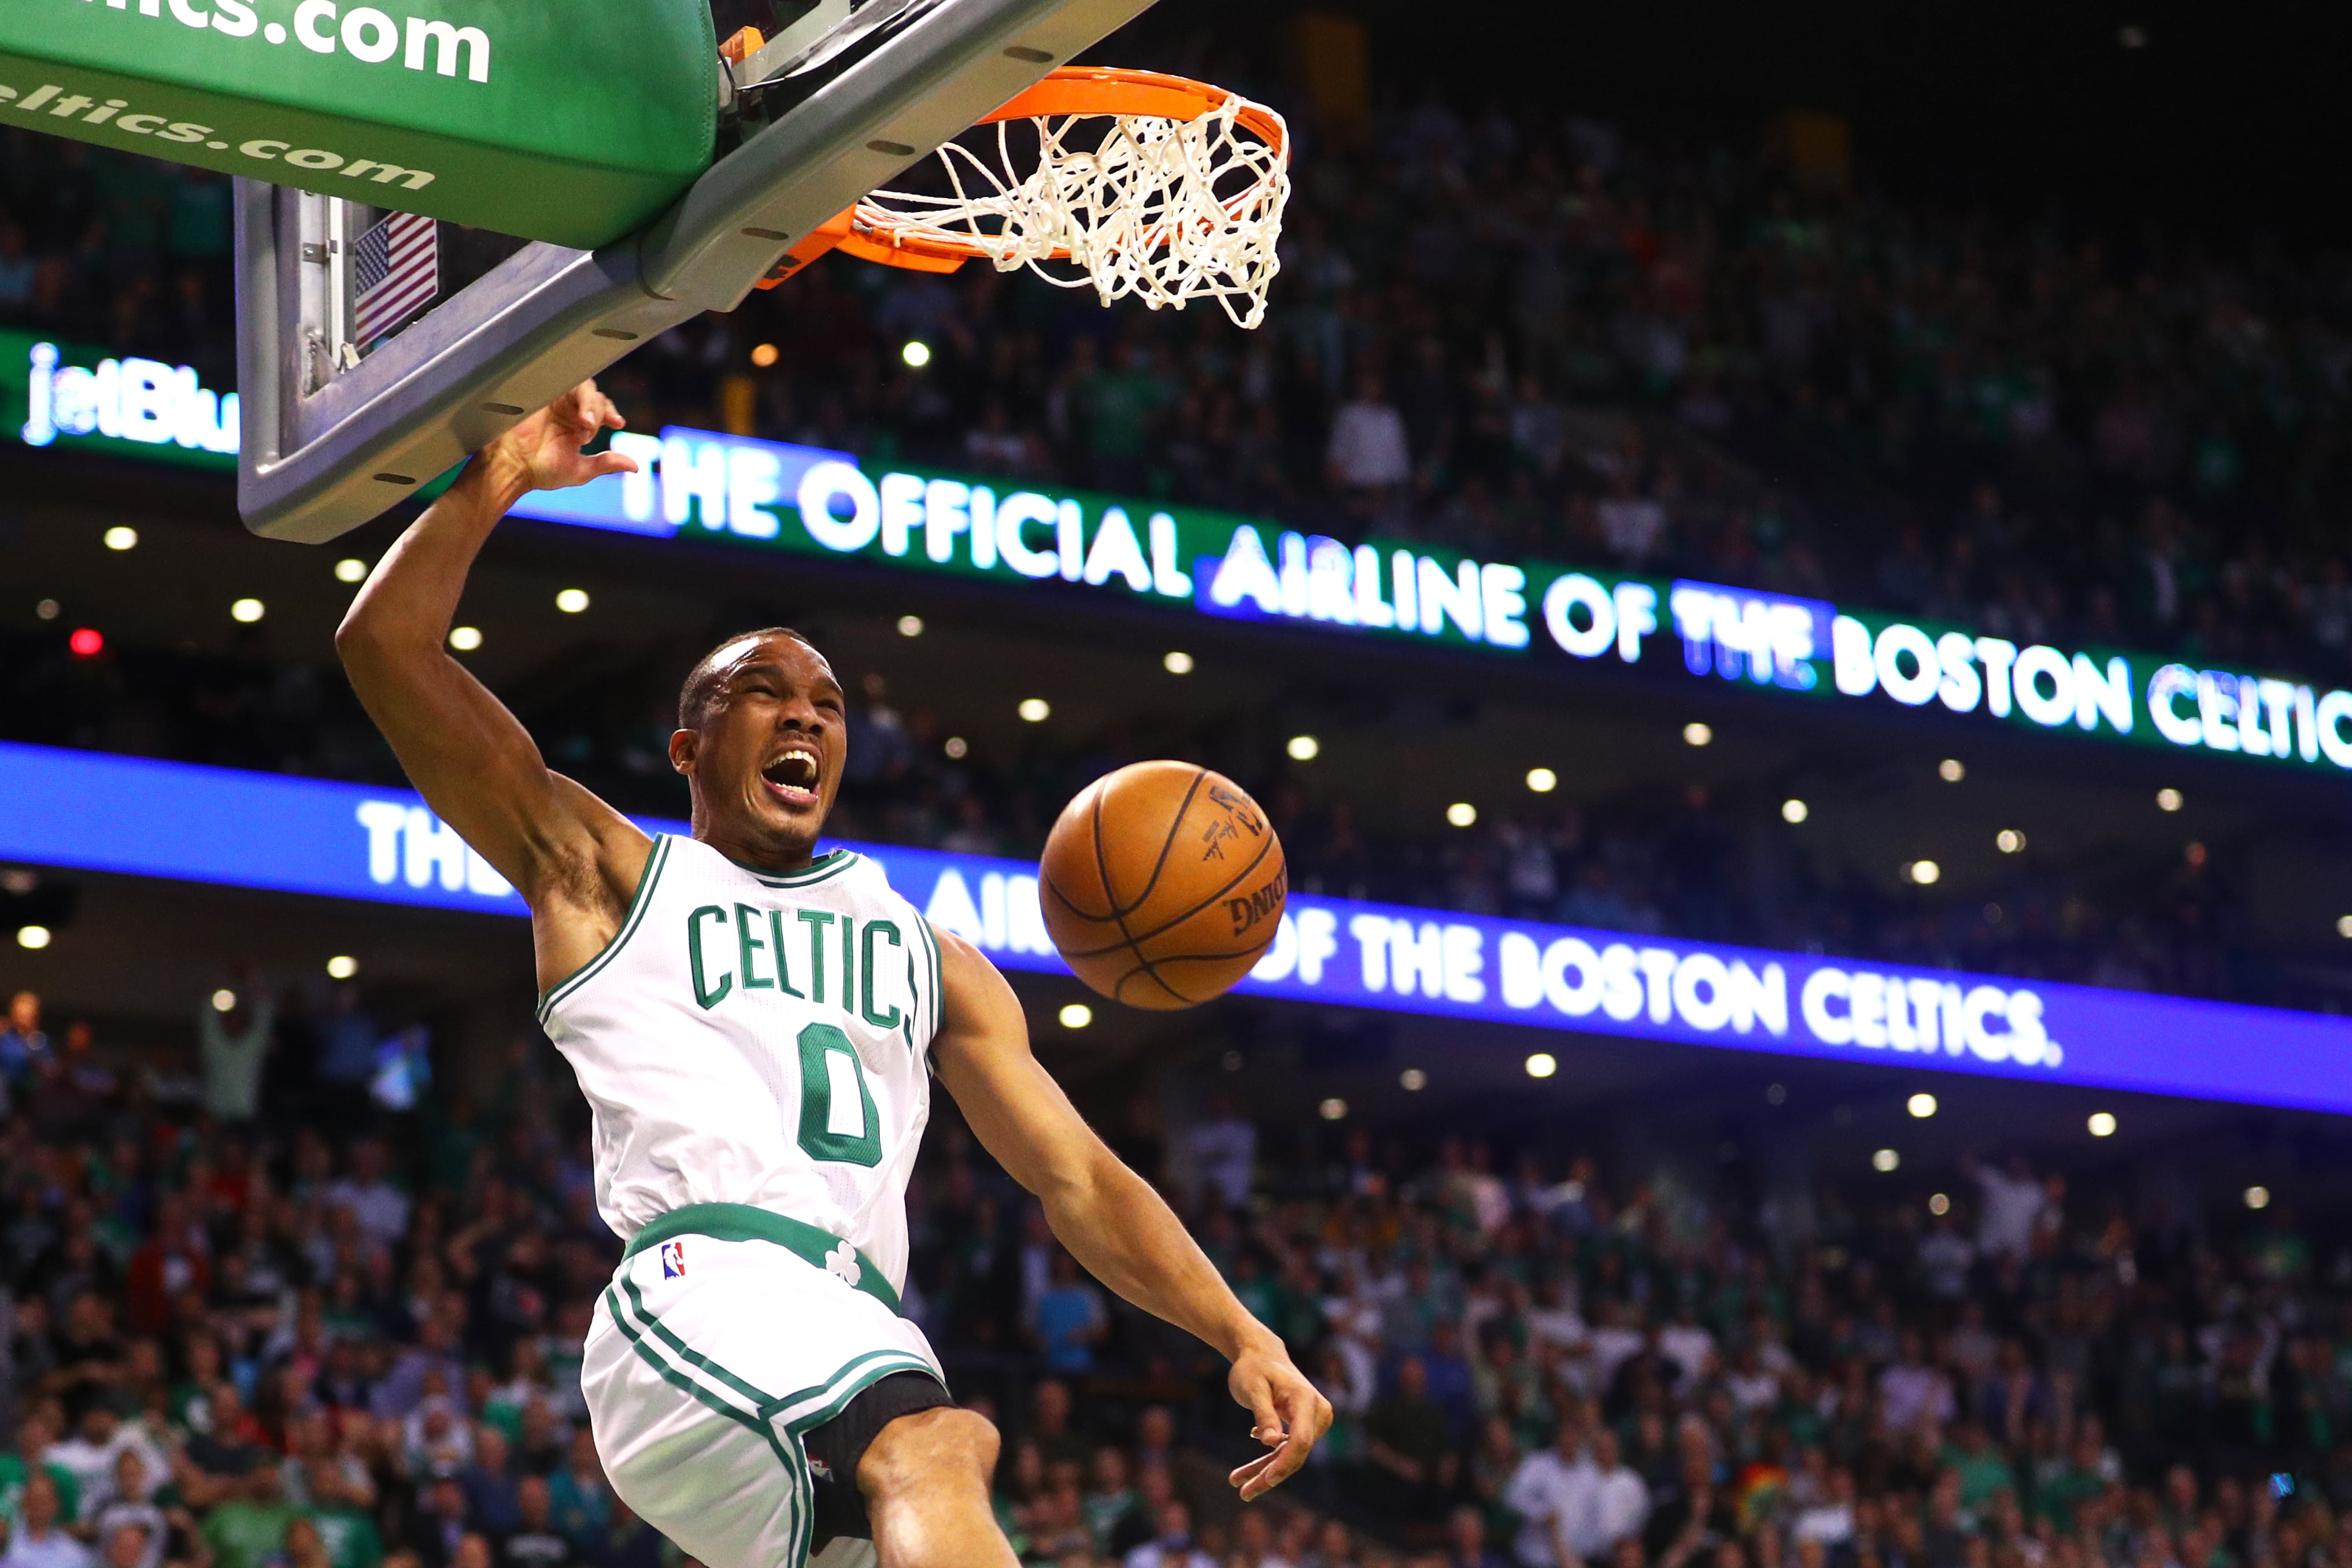 THE Absolute Cheapest Boston Celtics Playoff Tickets for Sale Online